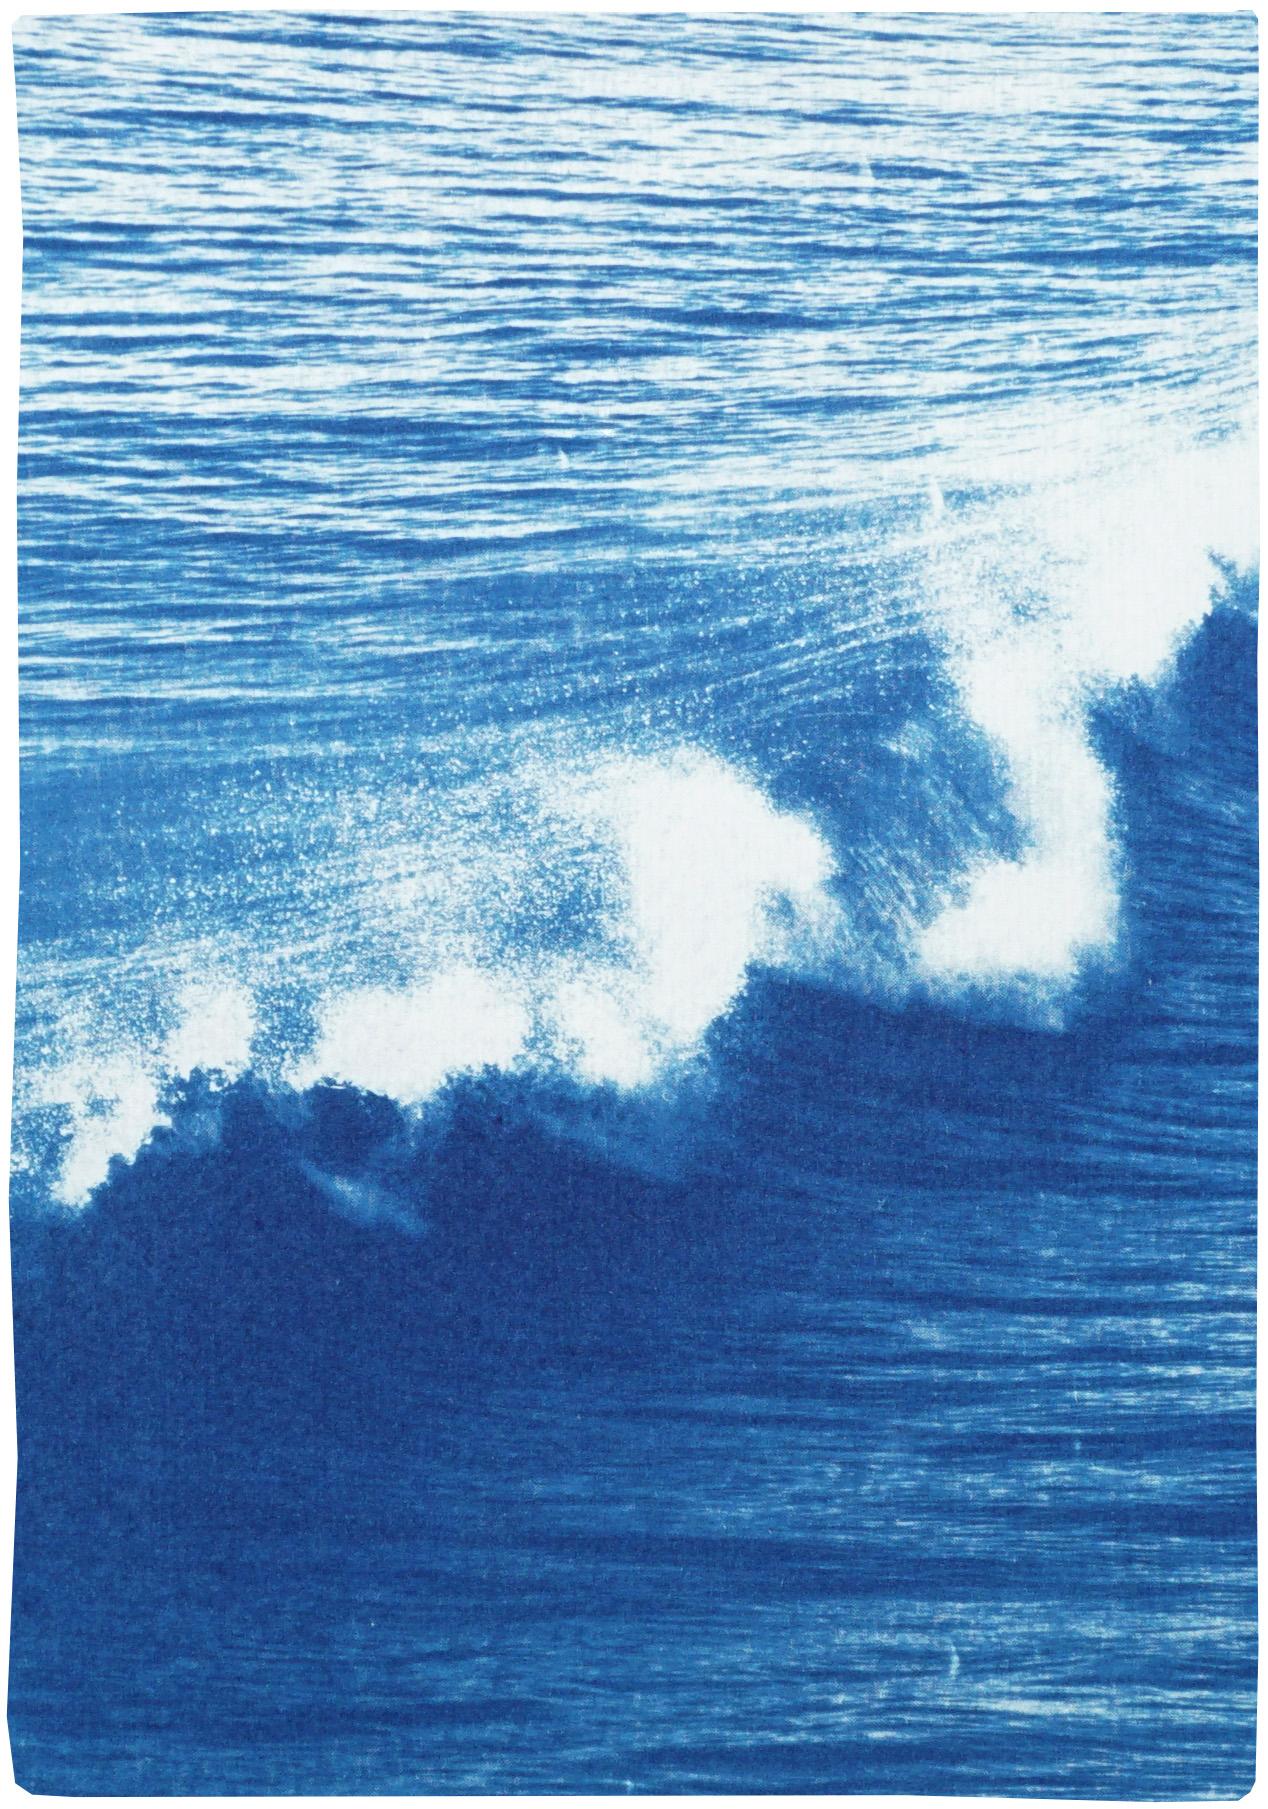 This is an exclusive handprinted limited edition cyanotype.

This gorgeous triptych shows a vigorous crashing wave off Los Angeles Coast. 

Details:
+ Title: Los Angeles Crashing Wave 
+ Year: 2020
+ Edition Size: 100
+ Stamped and Certificate of